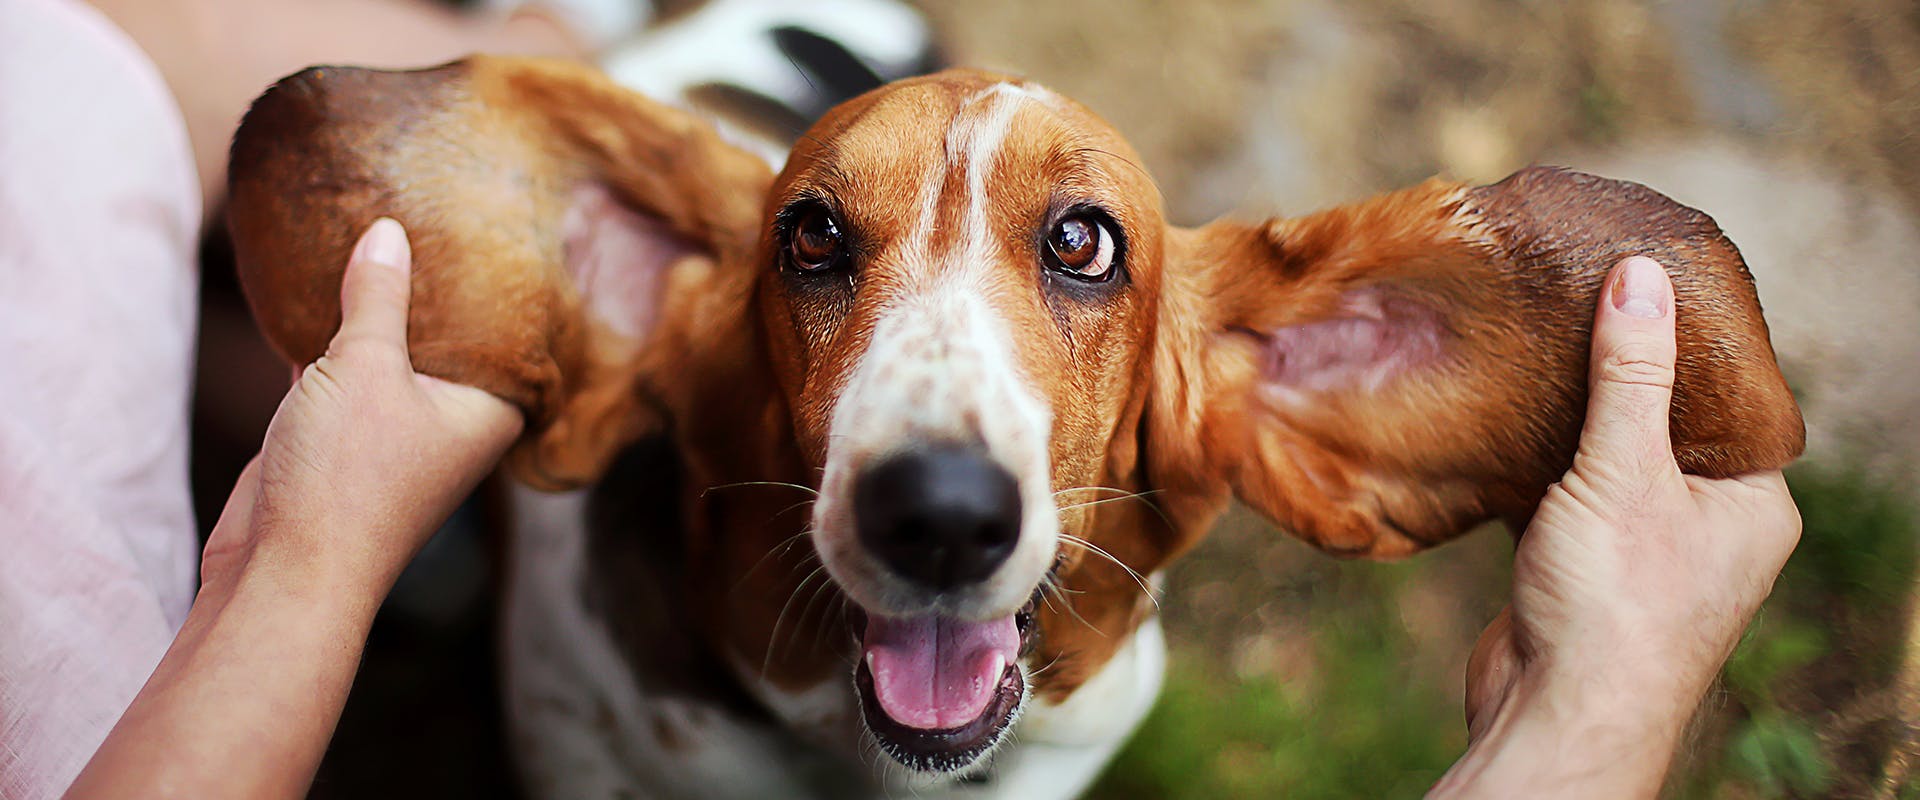 A person holding out a Basset Hound puppy's floppy ears